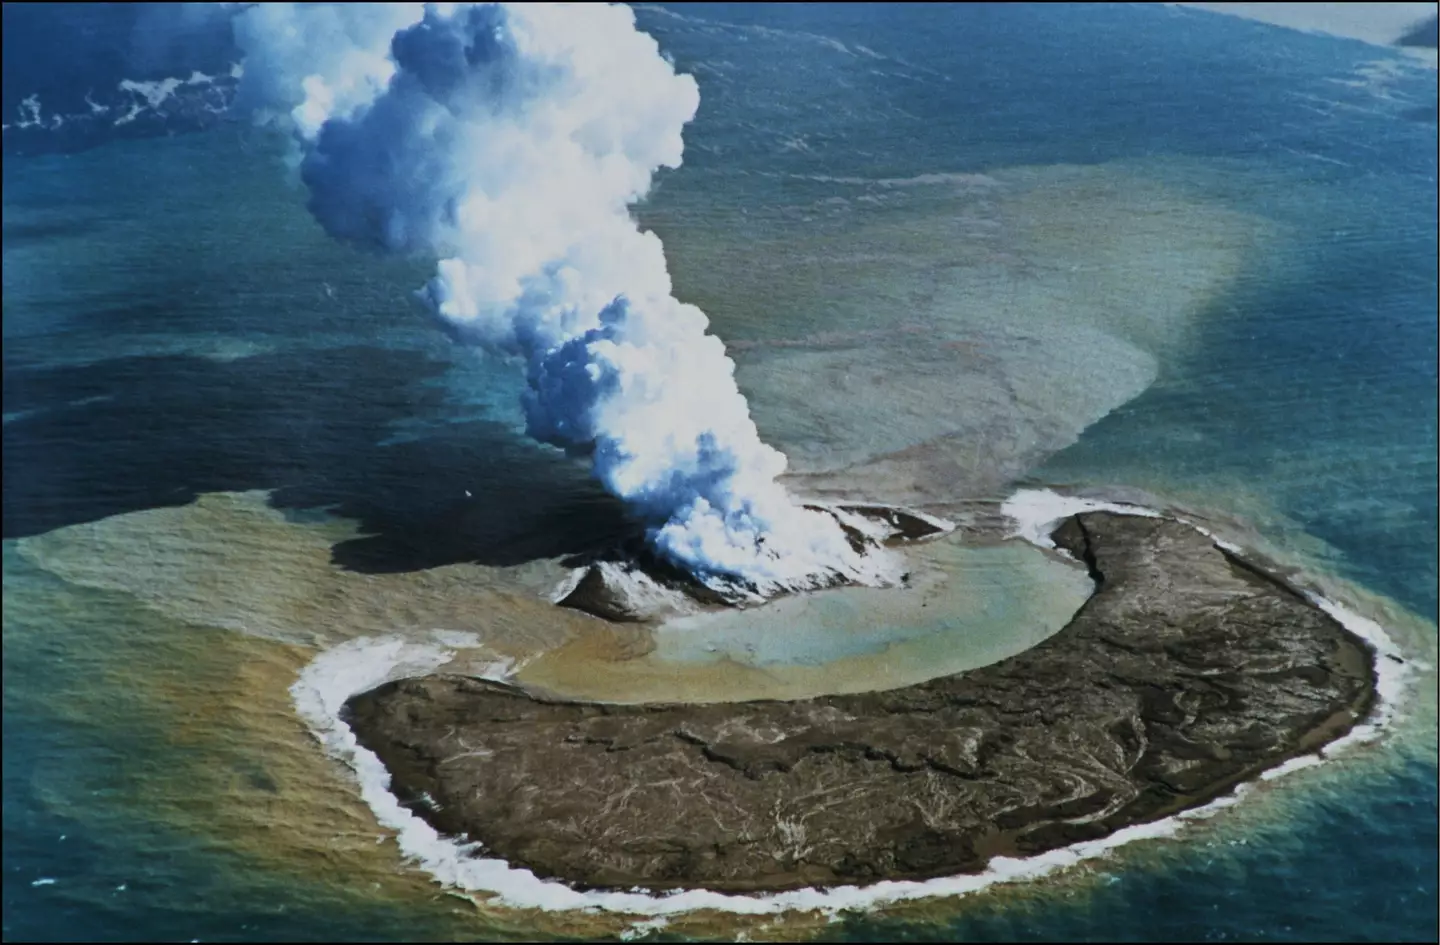 It's not the first time Japan has discovered a new island after a volcano eruption.